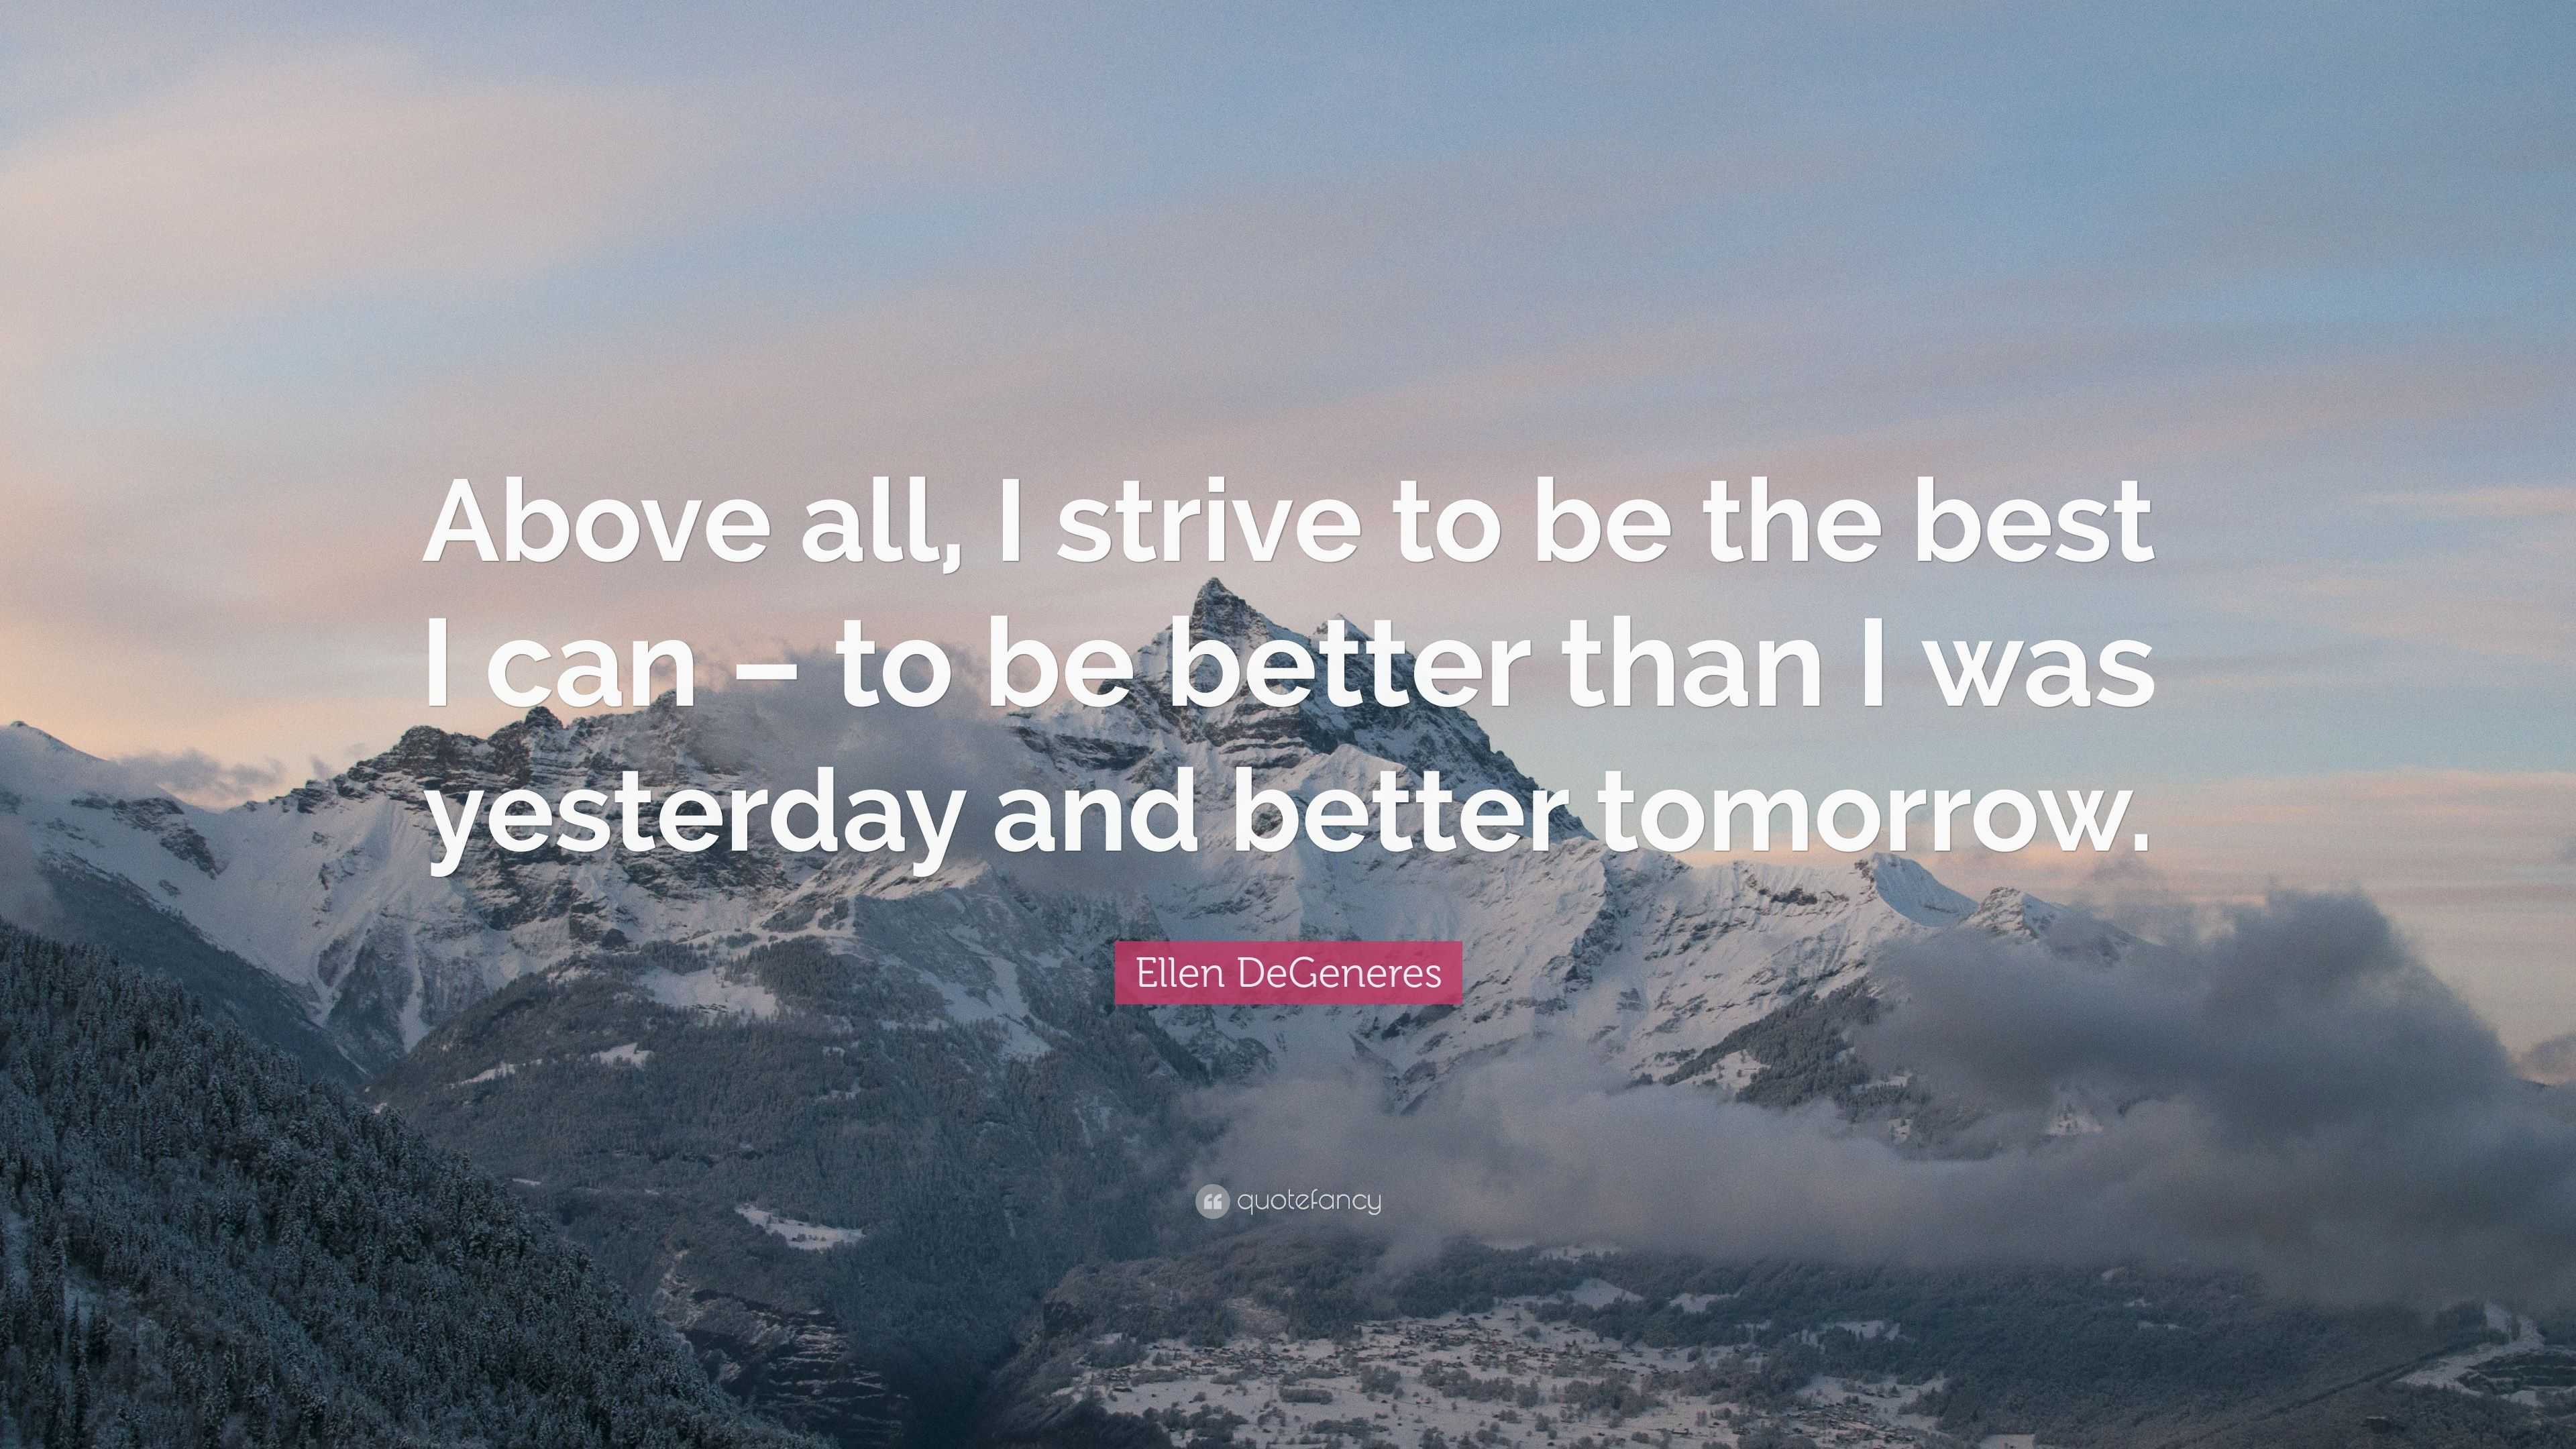 Ellen DeGeneres Quote: “Above all, I strive to be the best I can – to